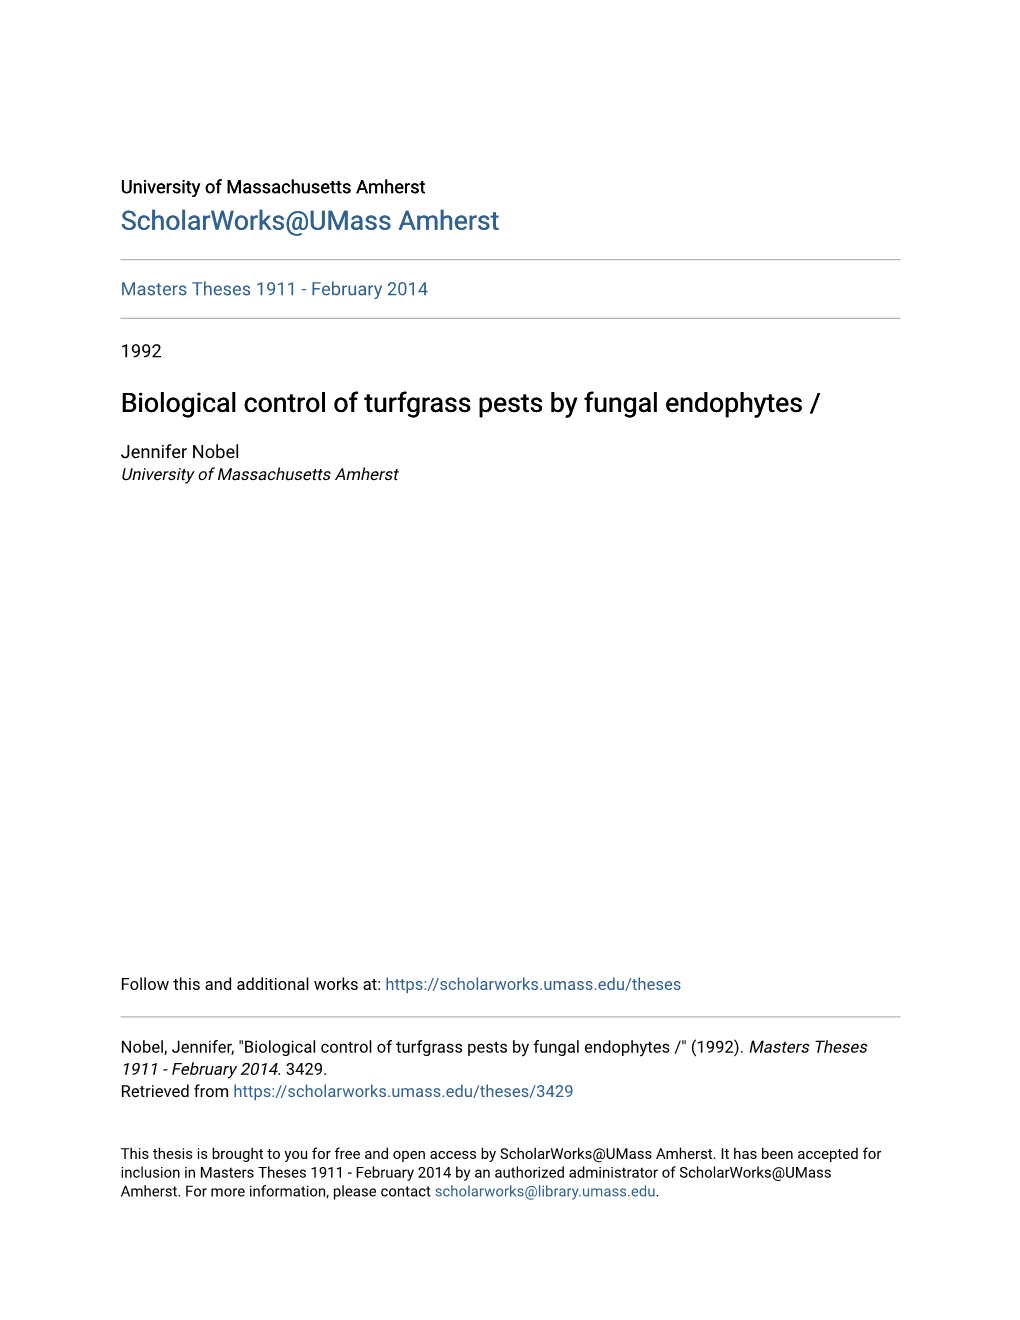 Biological Control of Turfgrass Pests by Fungal Endophytes